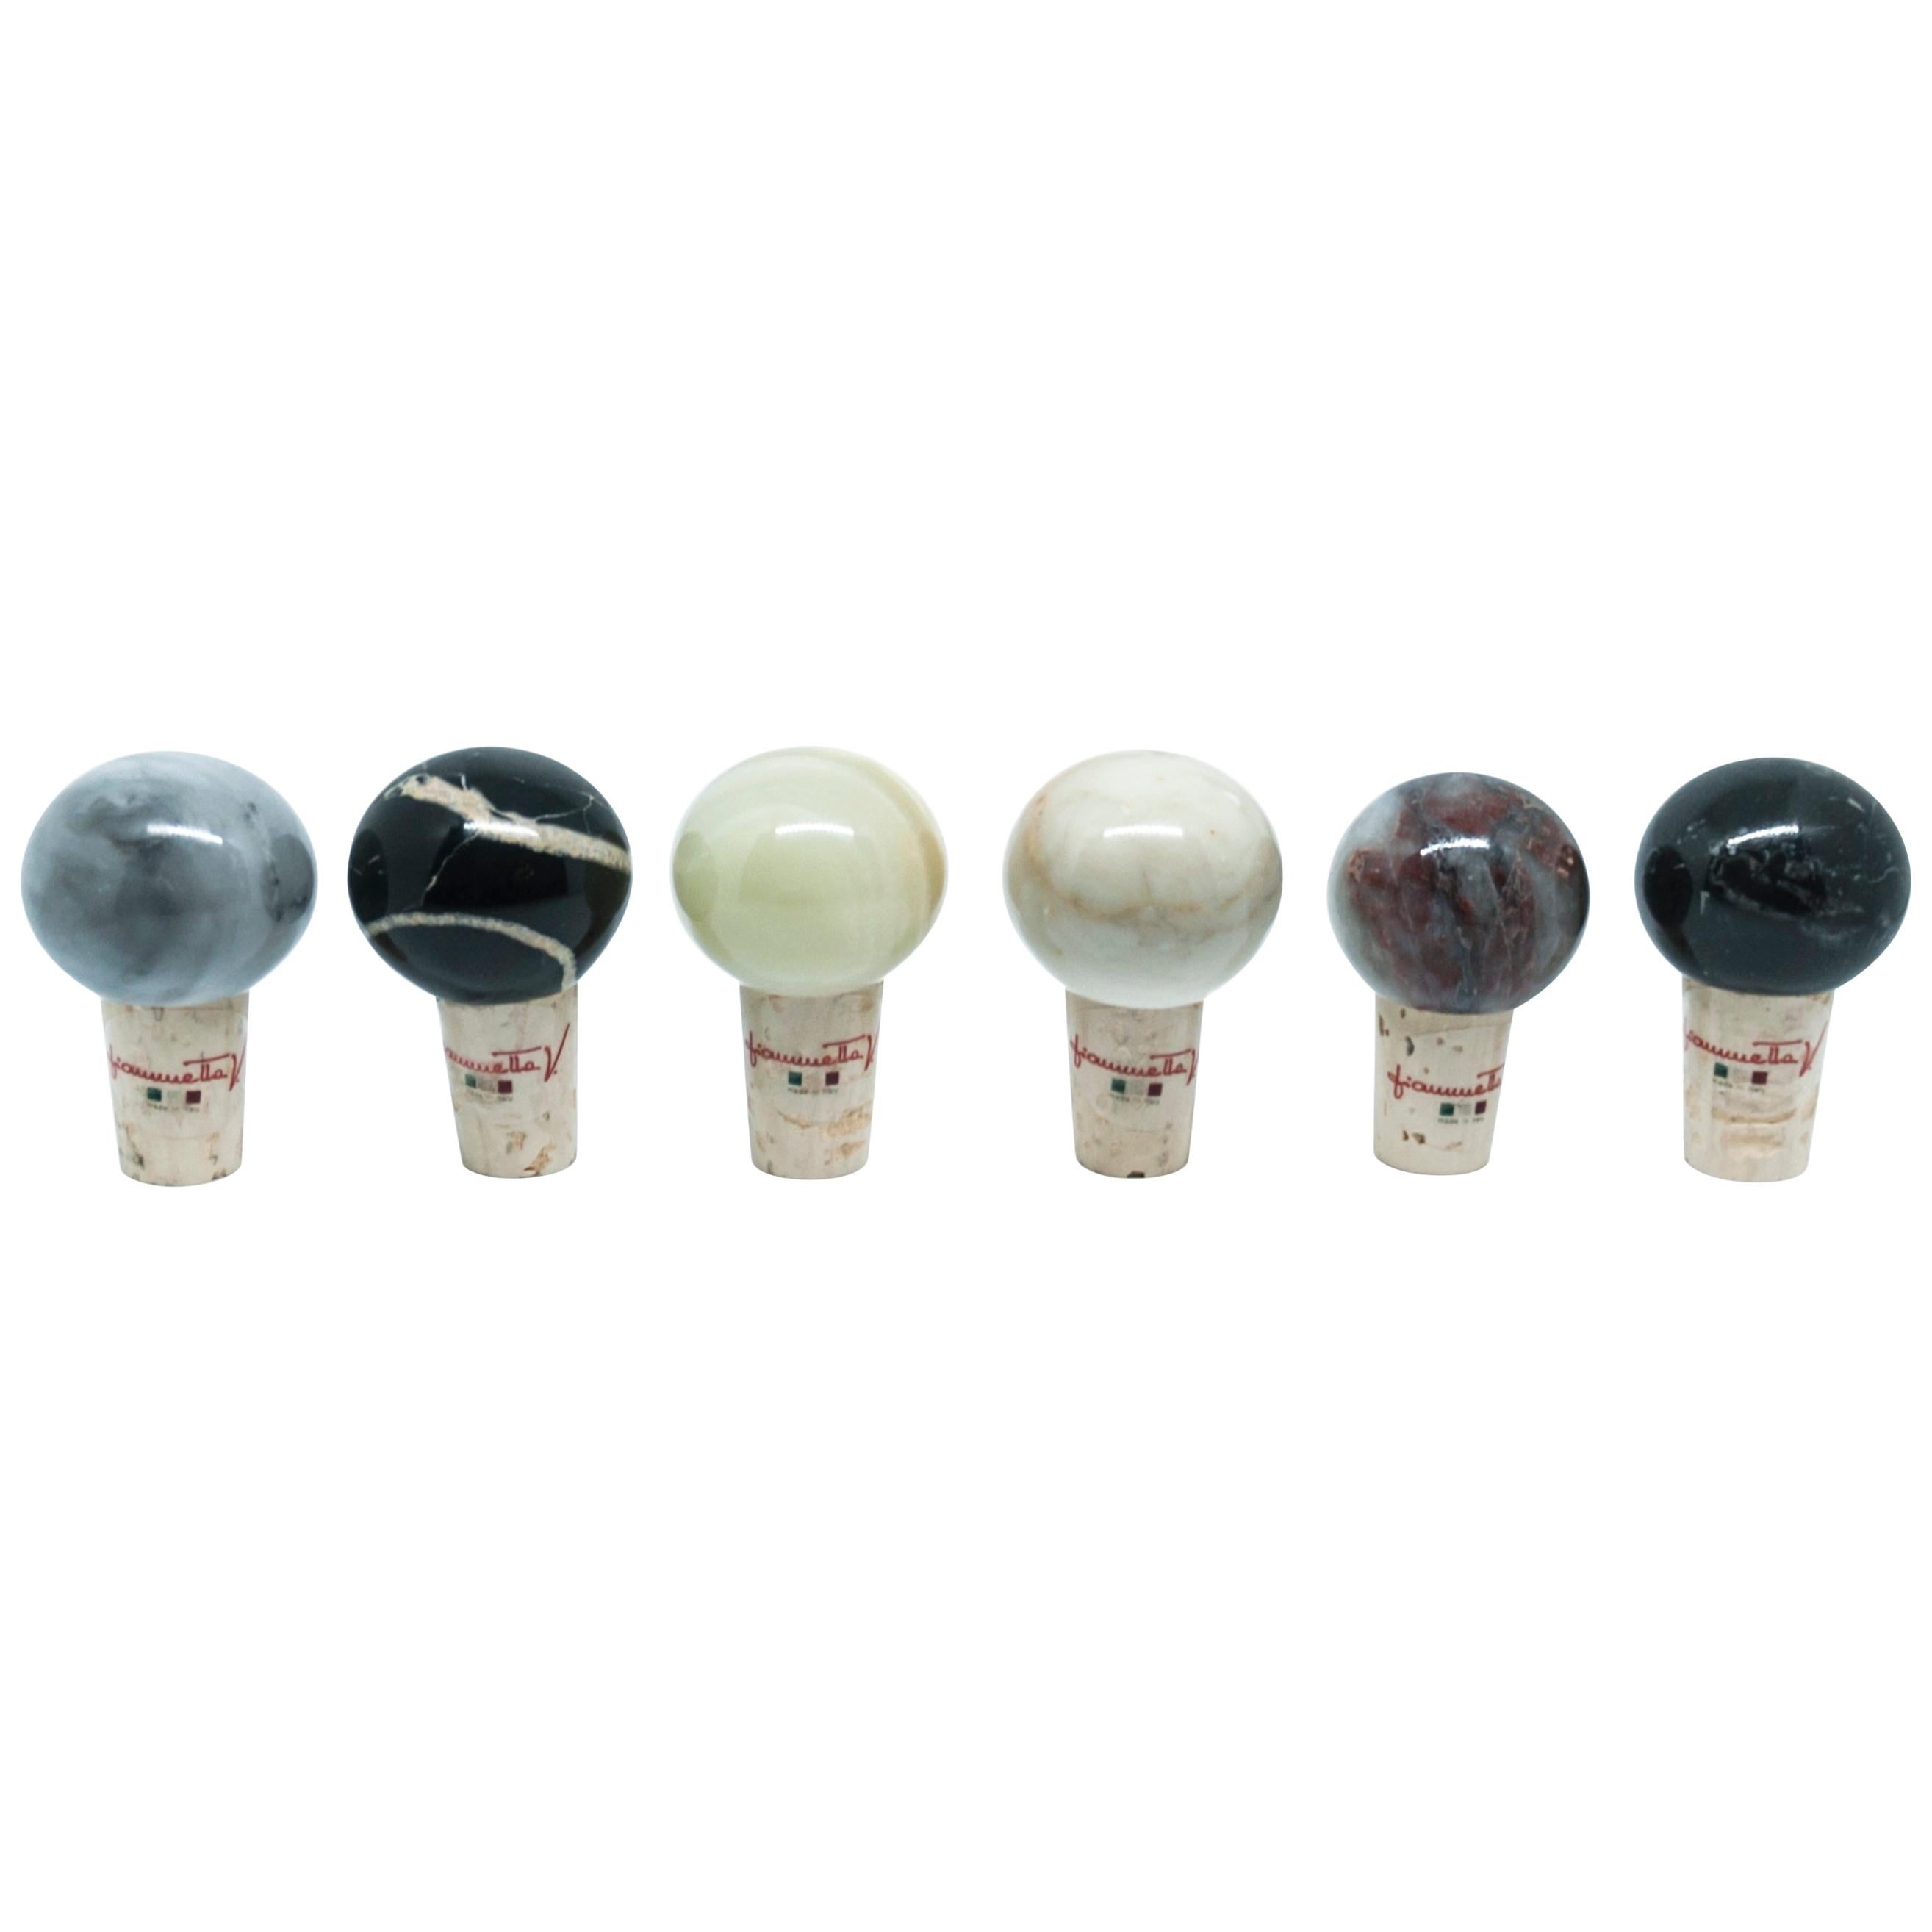 Handmade Set of 6 Mixed Marbles and Cork Wine Bottle Stoppers